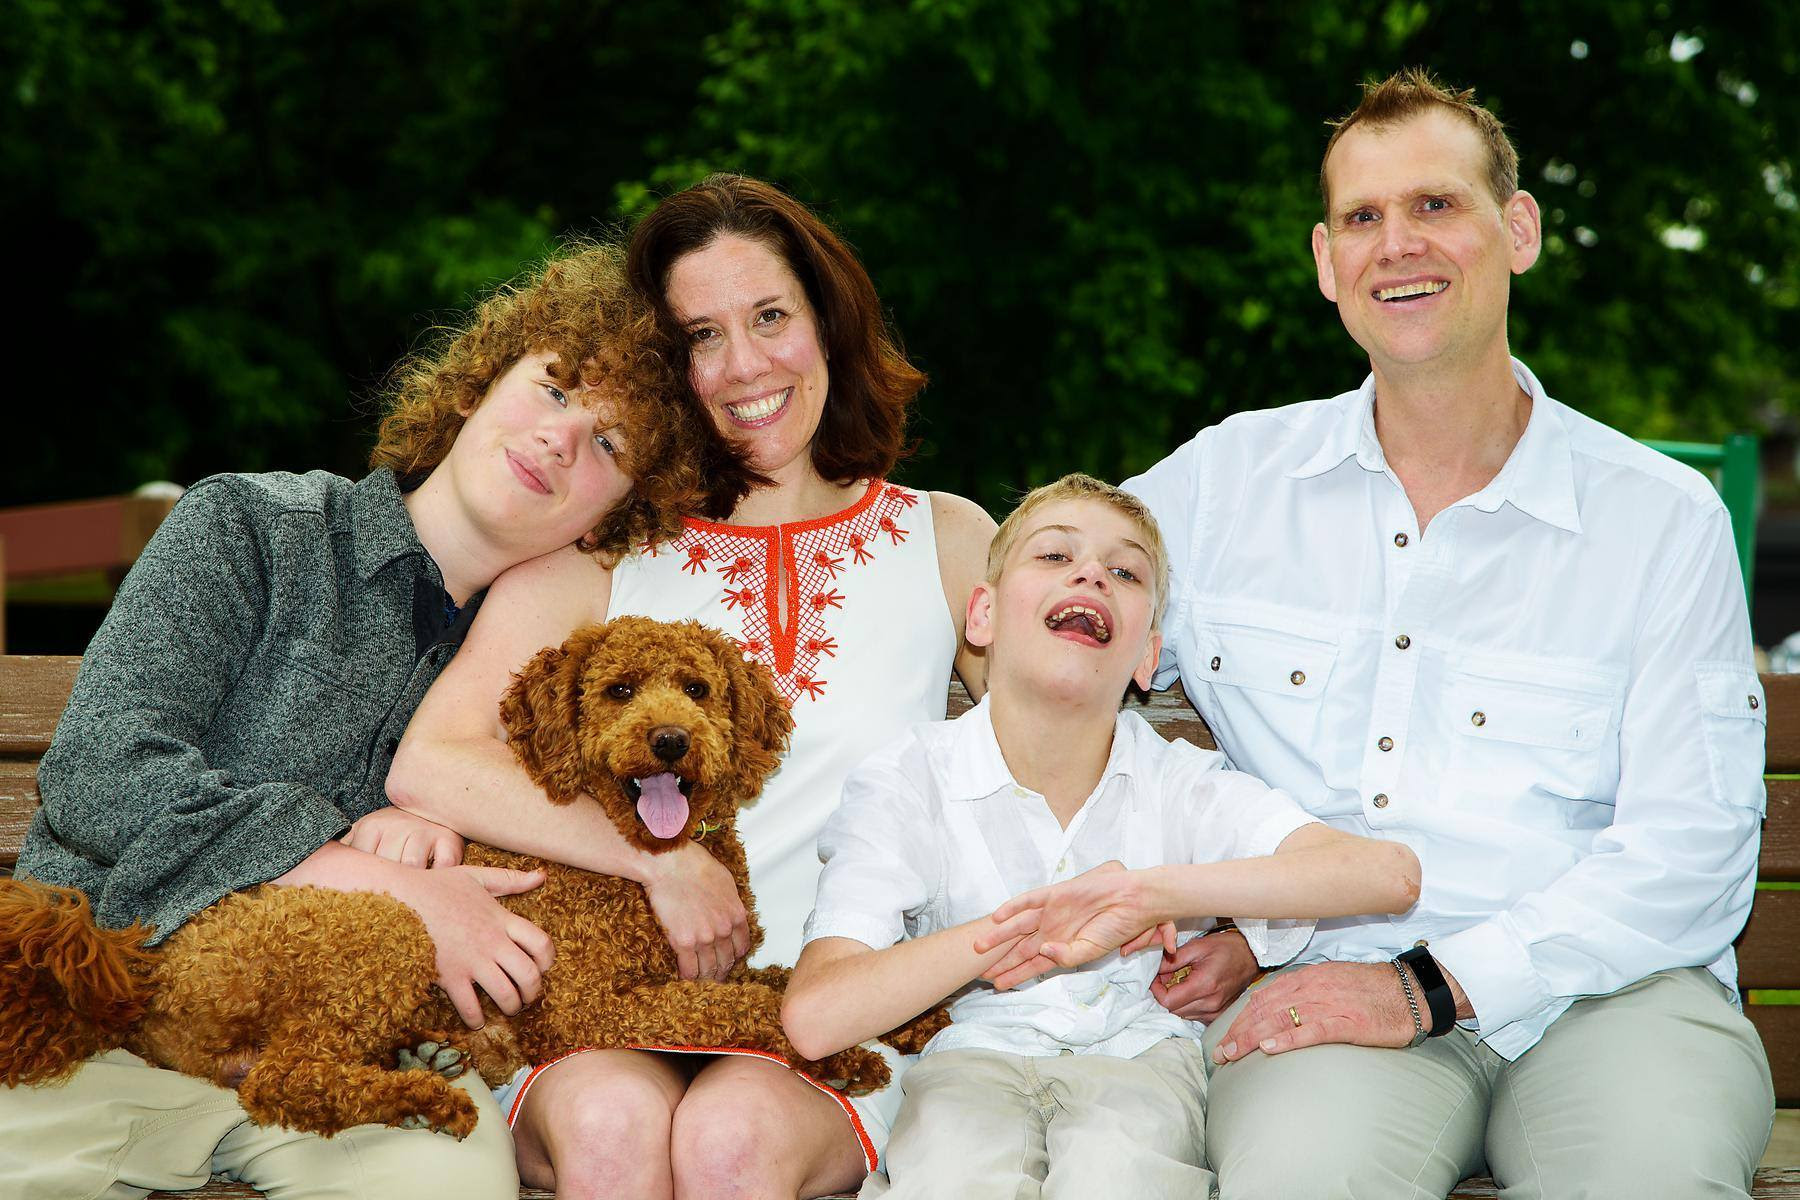 A family sitting on a bench. One son on the left is having curly red hair and a cute labradoodle on his lap. Next to him is his mom, a woman with brown hair who smiles brightly. Next to her,
the younger son who wears a white shirt. And on the right side is the dad wearing a white shirt as well. 